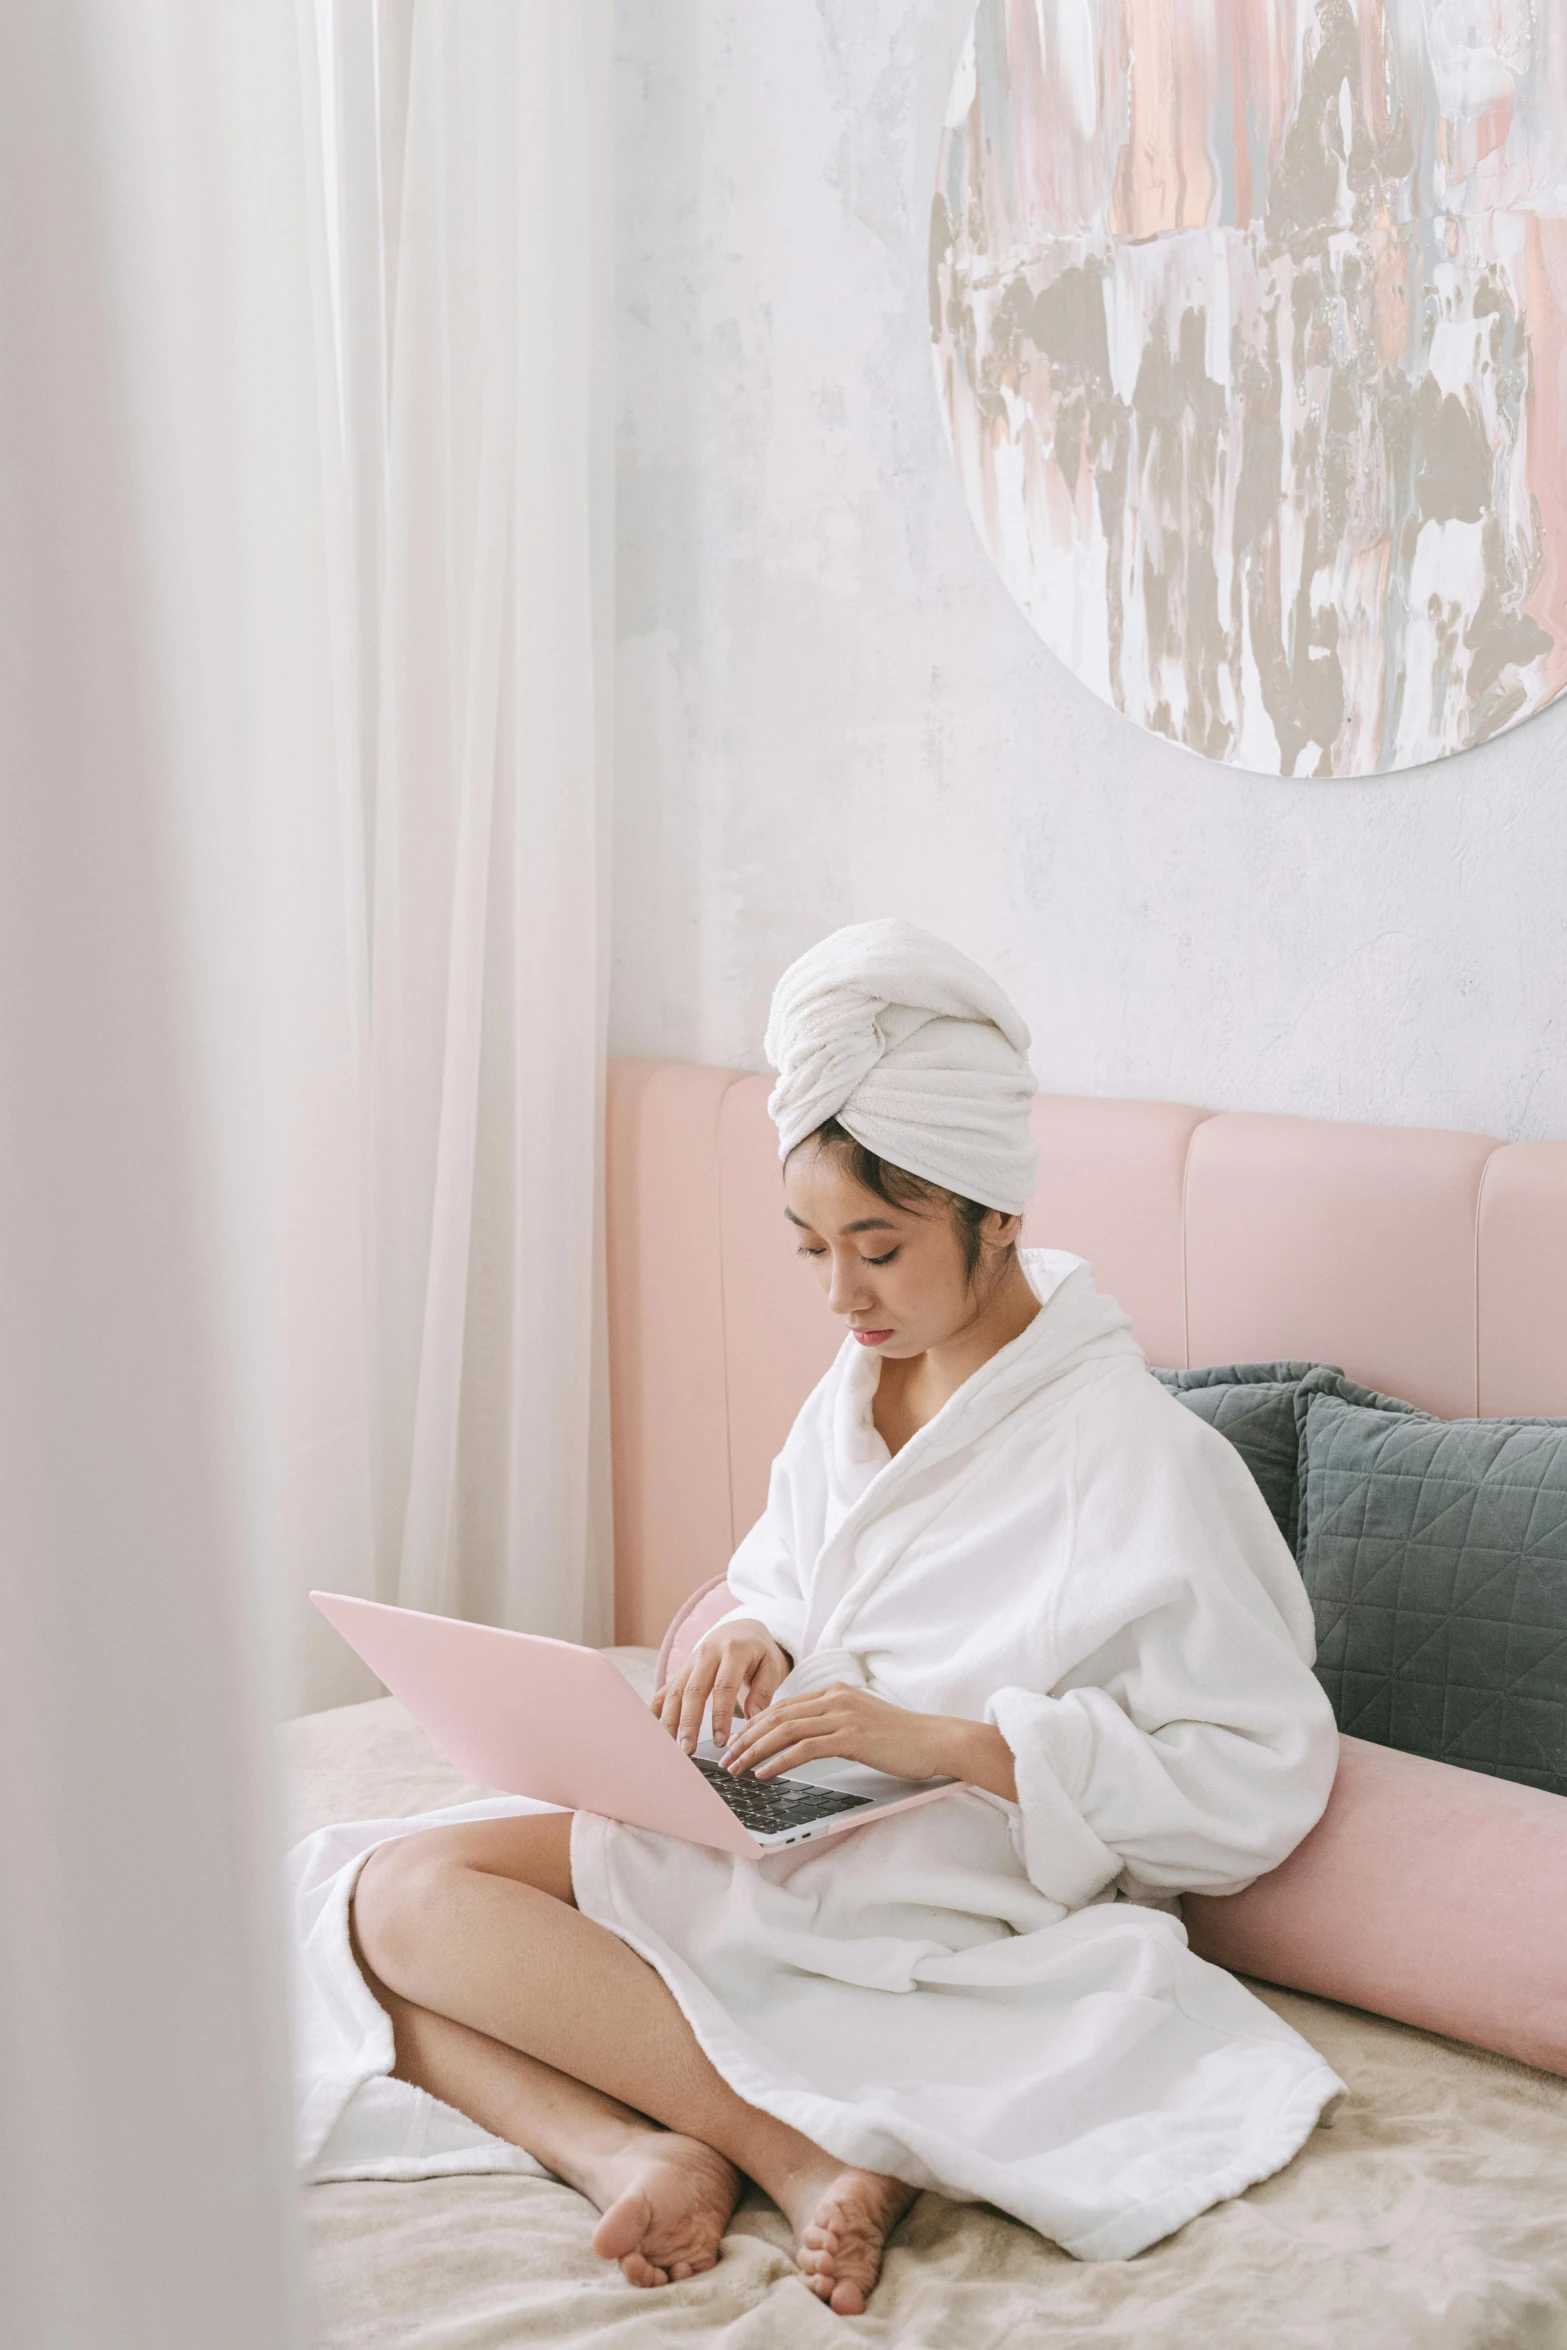 a woman sitting on a bed using a laptop, by Julia Pishtar, pexels contest winner, happening, pastel pink robes, skincare, white sarong, hair styled in a bun